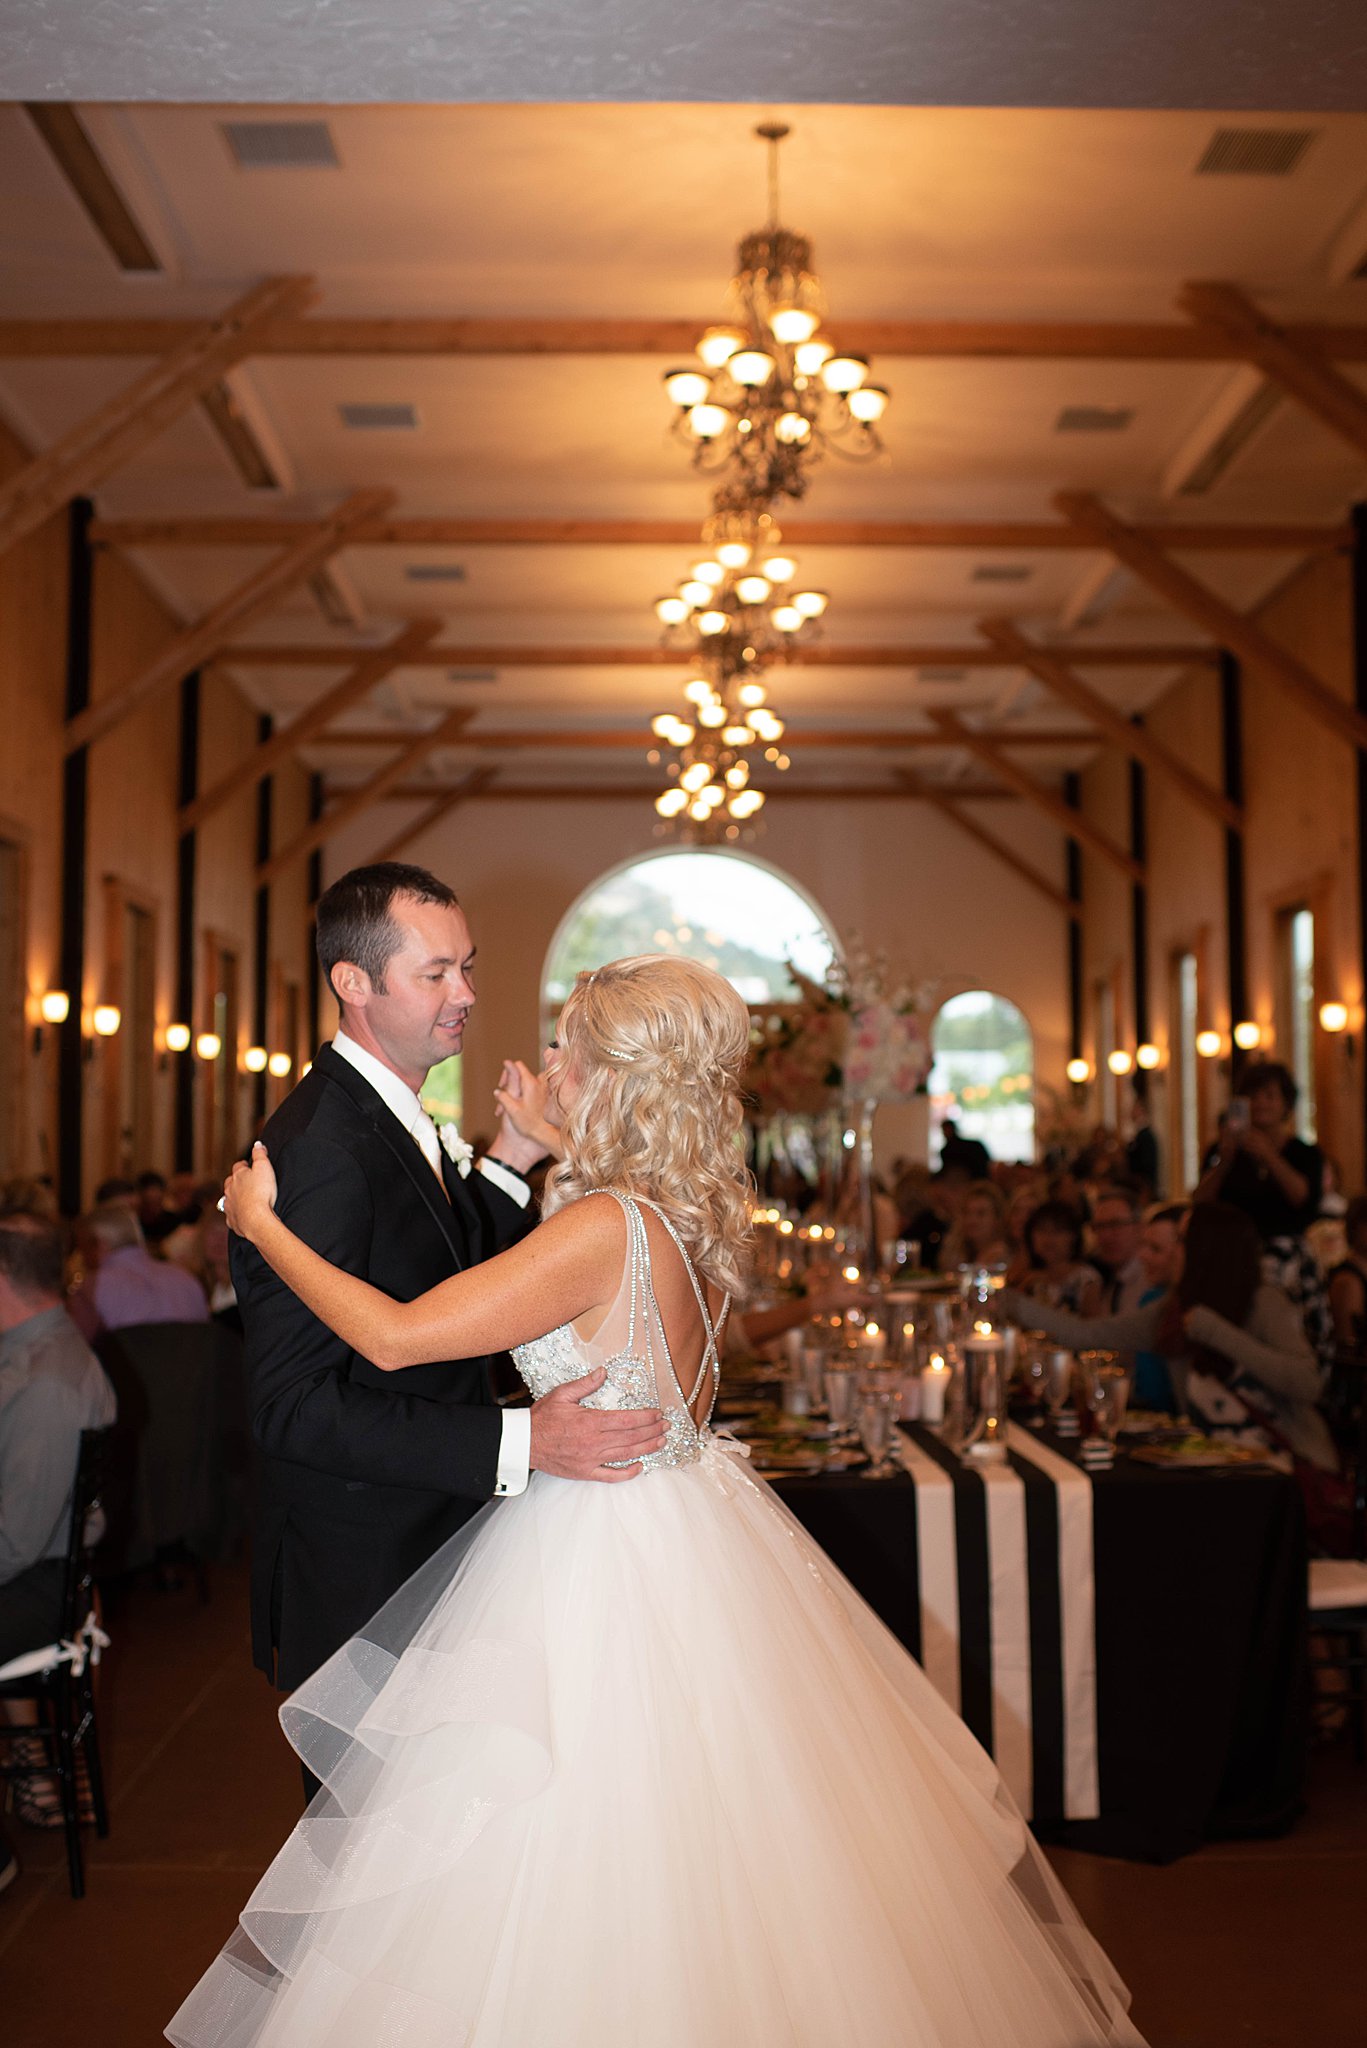 Newlyweds dance in a lang reception room in front of guests